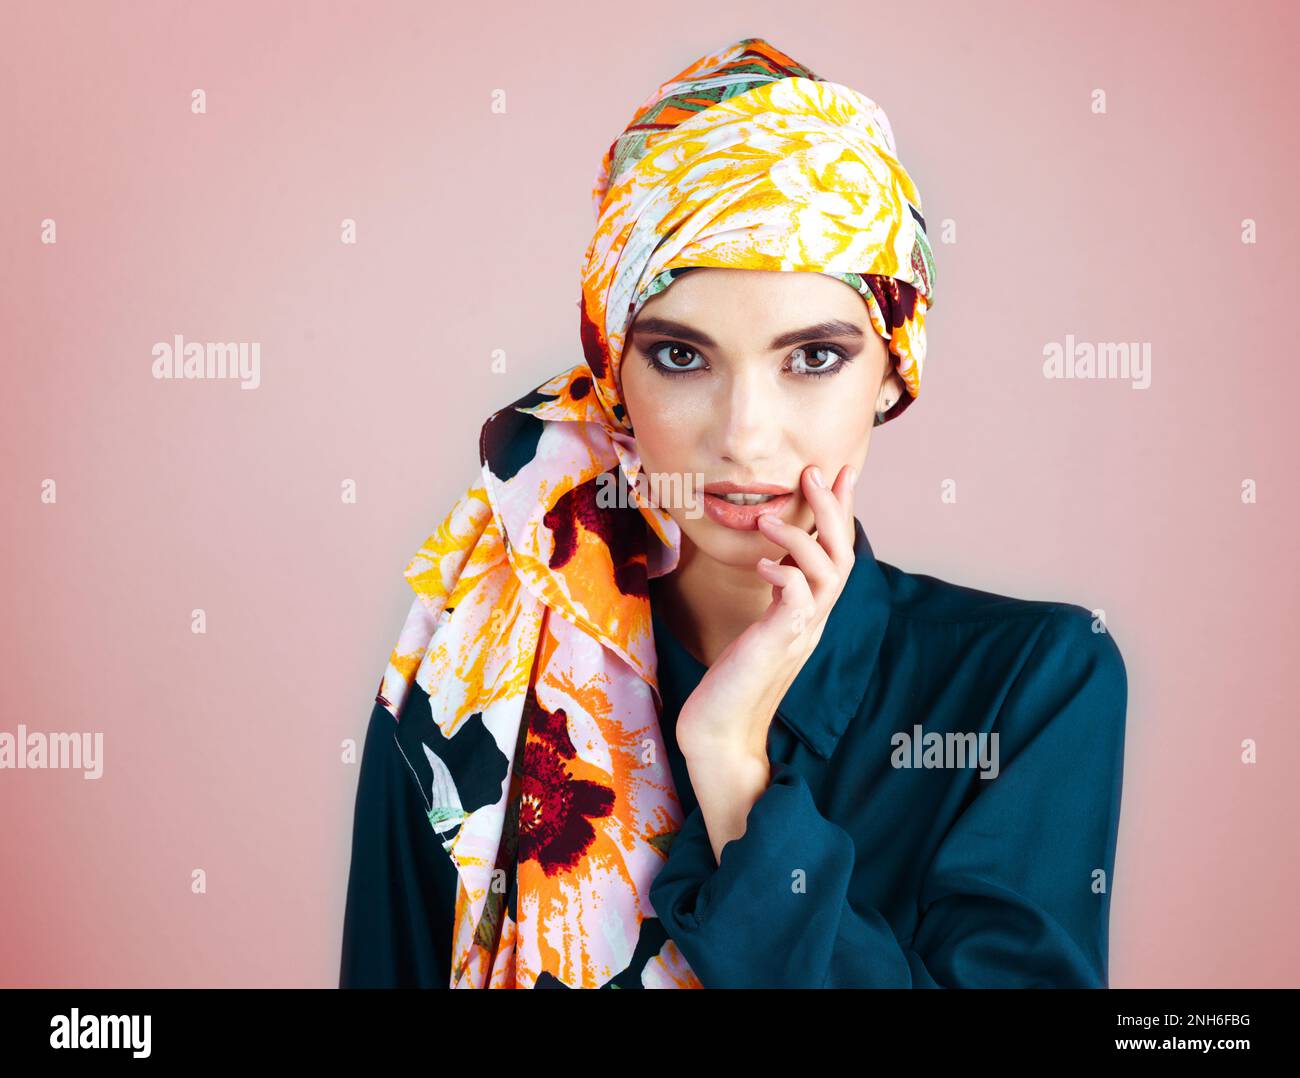 If looks could kill. Studio portrait of a confident young woman wearing a colorful head scarf while posing against a pink background. Stock Photo